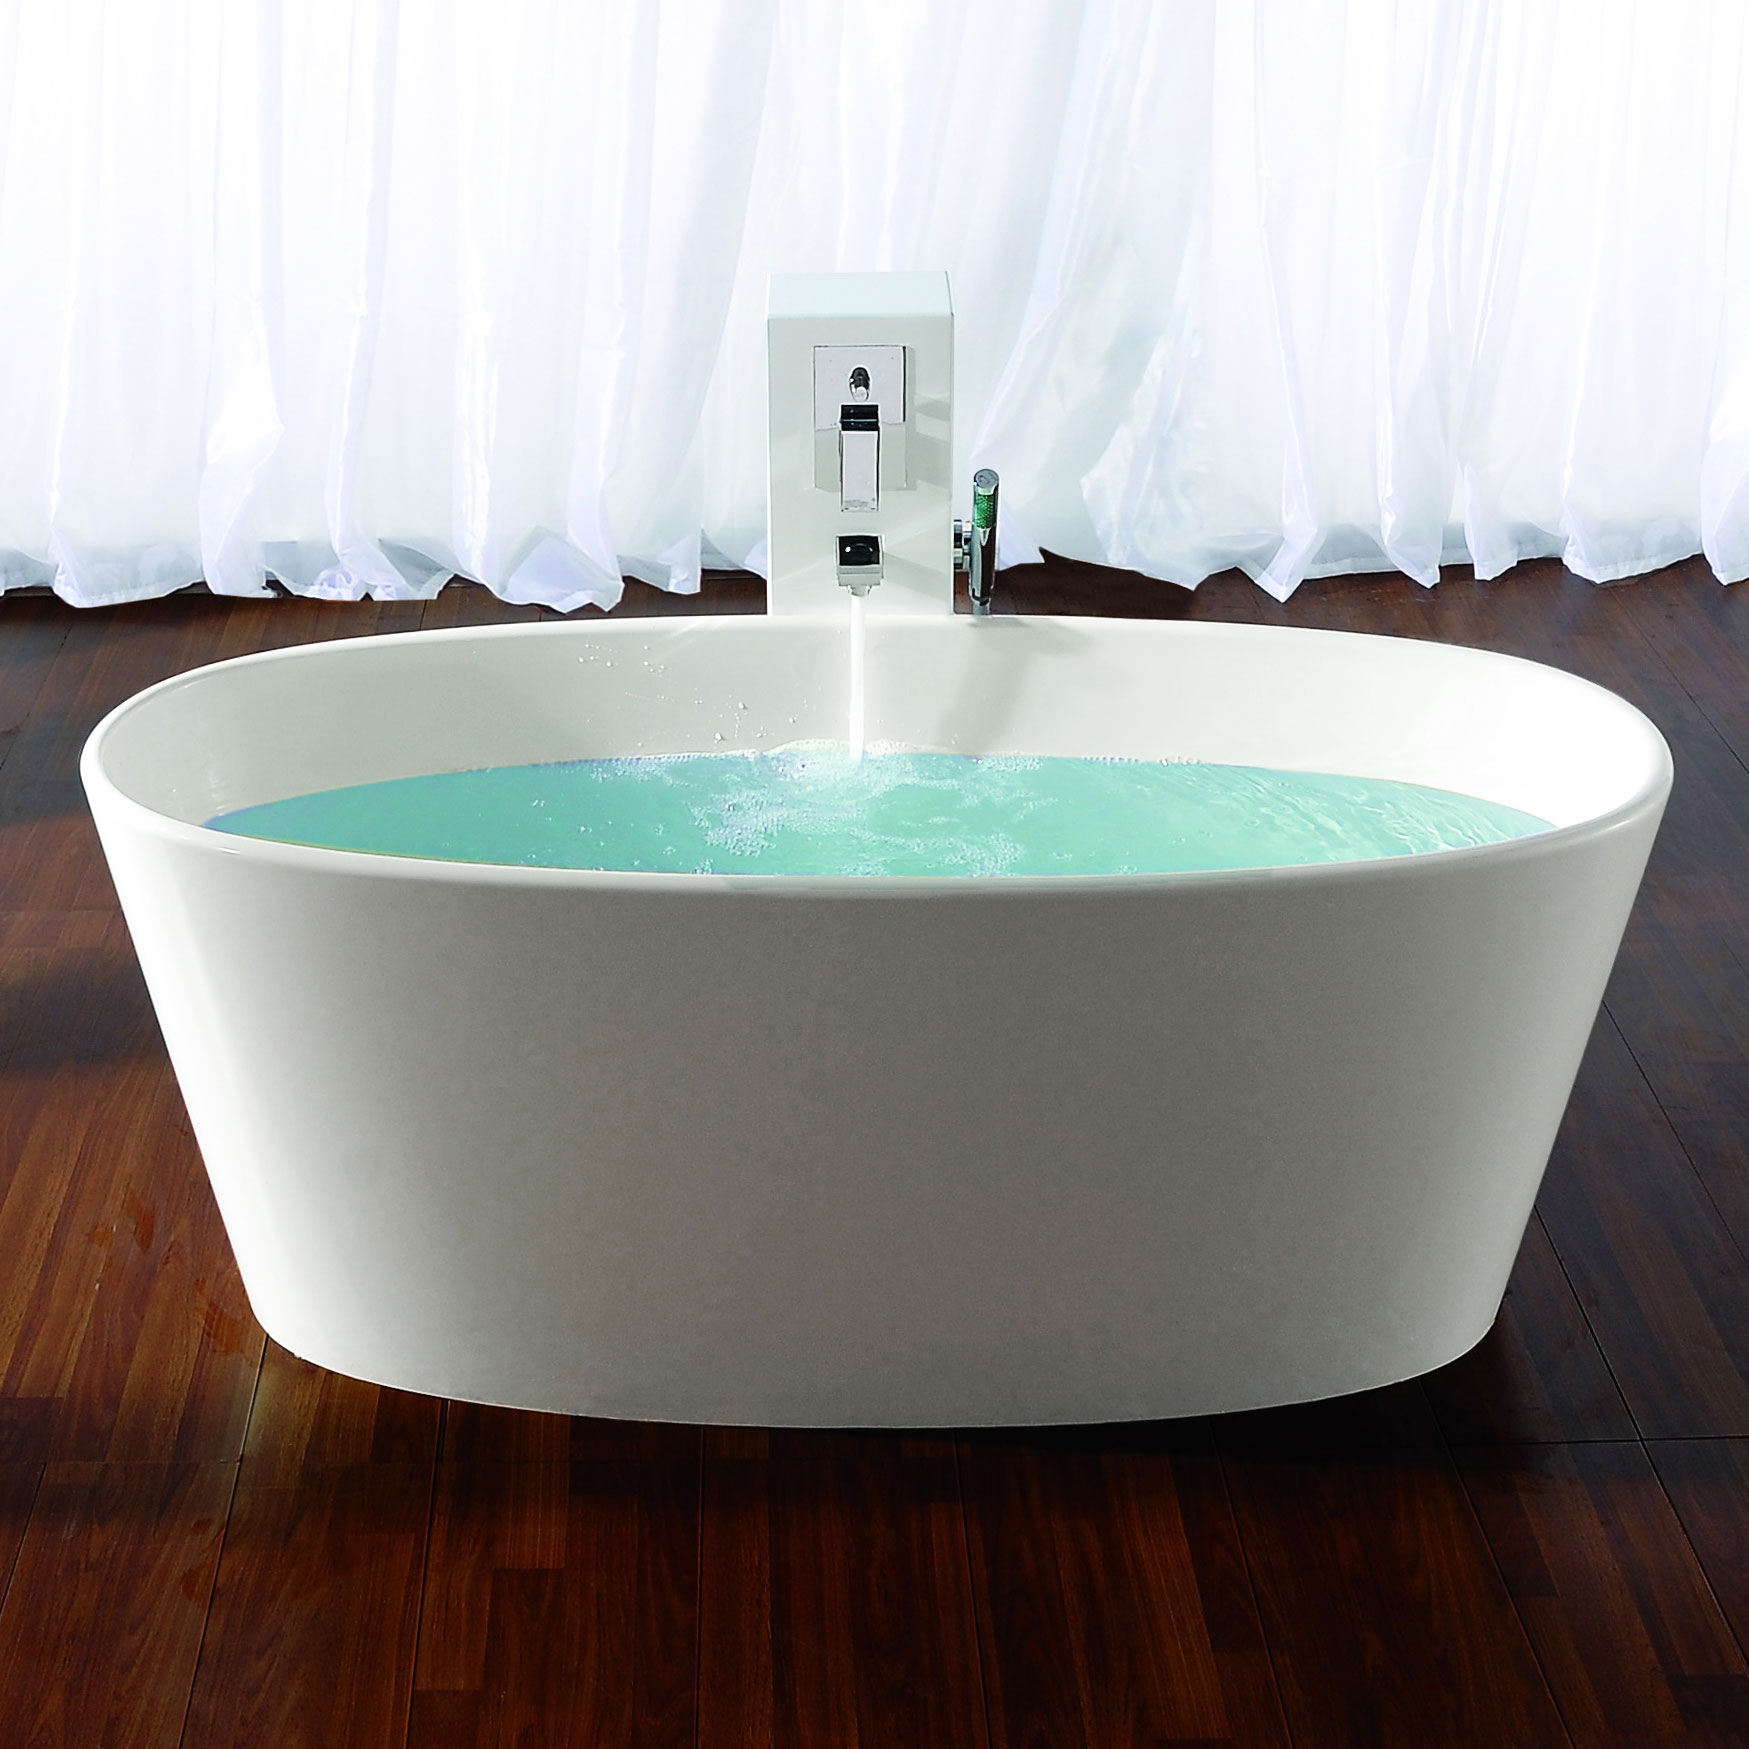 Standing Bath Modern Free Standing Bath Tubs With Modern Design In White Color Completed With White Shower Curtain And Wooden Flooring Design Ideas Bathroom Free Standing Bath Tubs With Gorgeous Design And Style